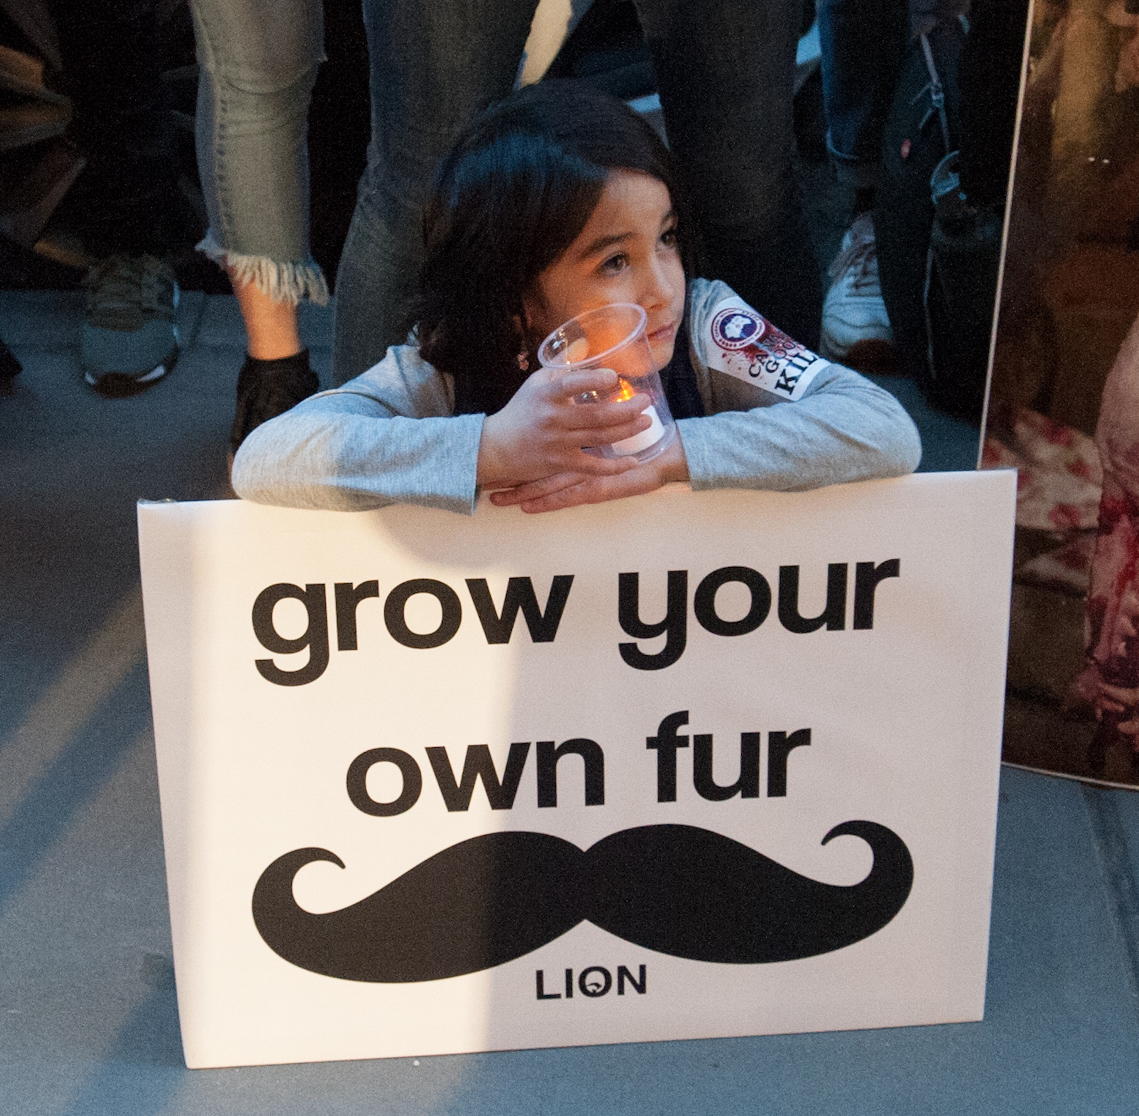 At the silent vigil outside the Soho Canada Goose store on Sat., Feb. 18, after the Anti-Fur March.